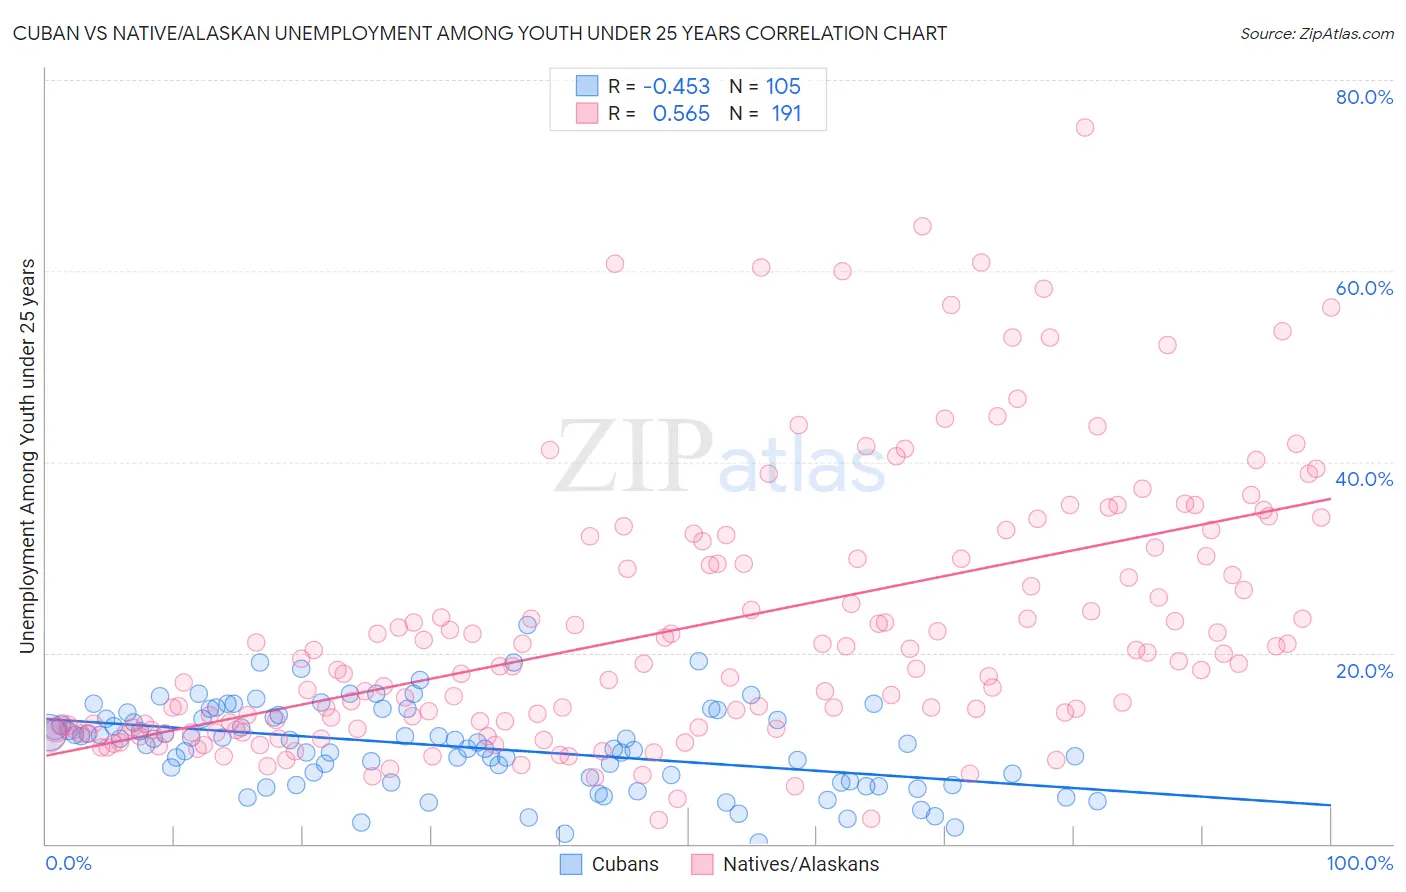 Cuban vs Native/Alaskan Unemployment Among Youth under 25 years